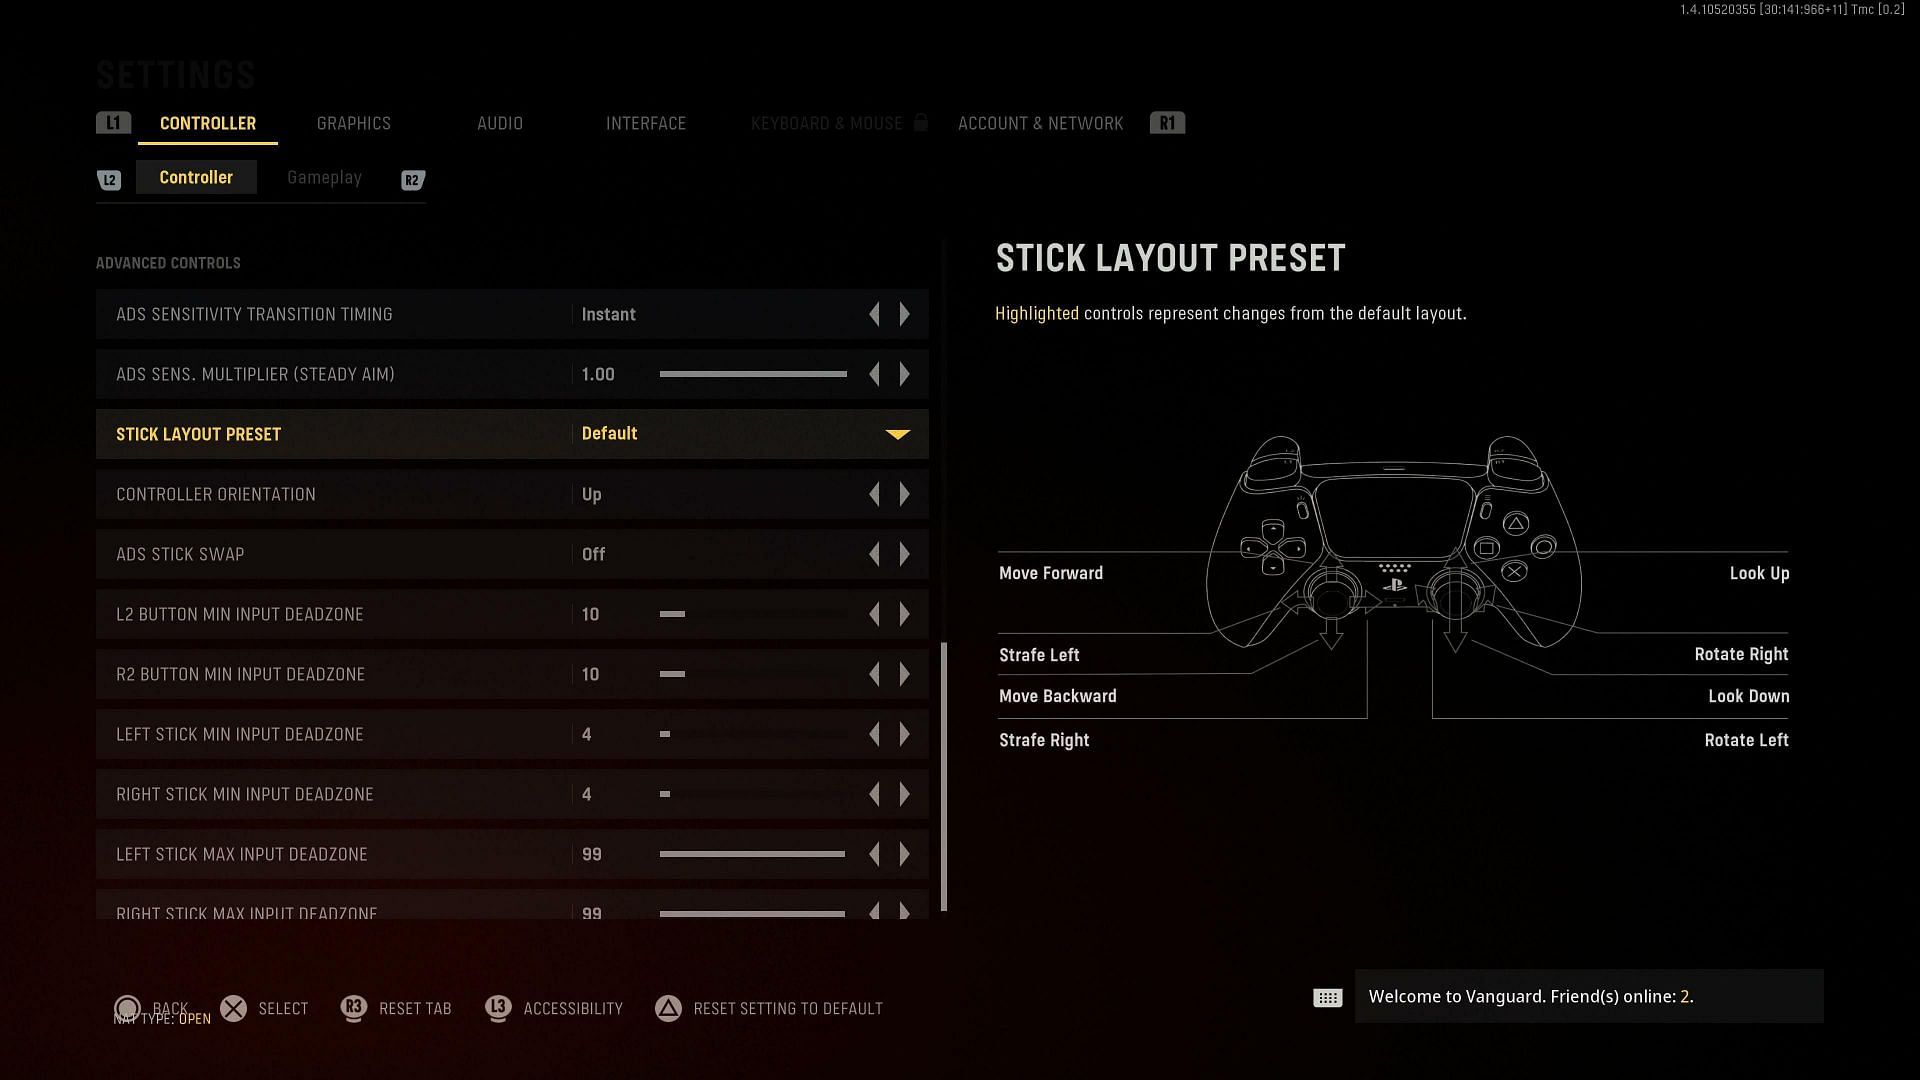 Call of Duty: Vanguard players will want to get the right settings to improve their gameplay (Image via Activision)